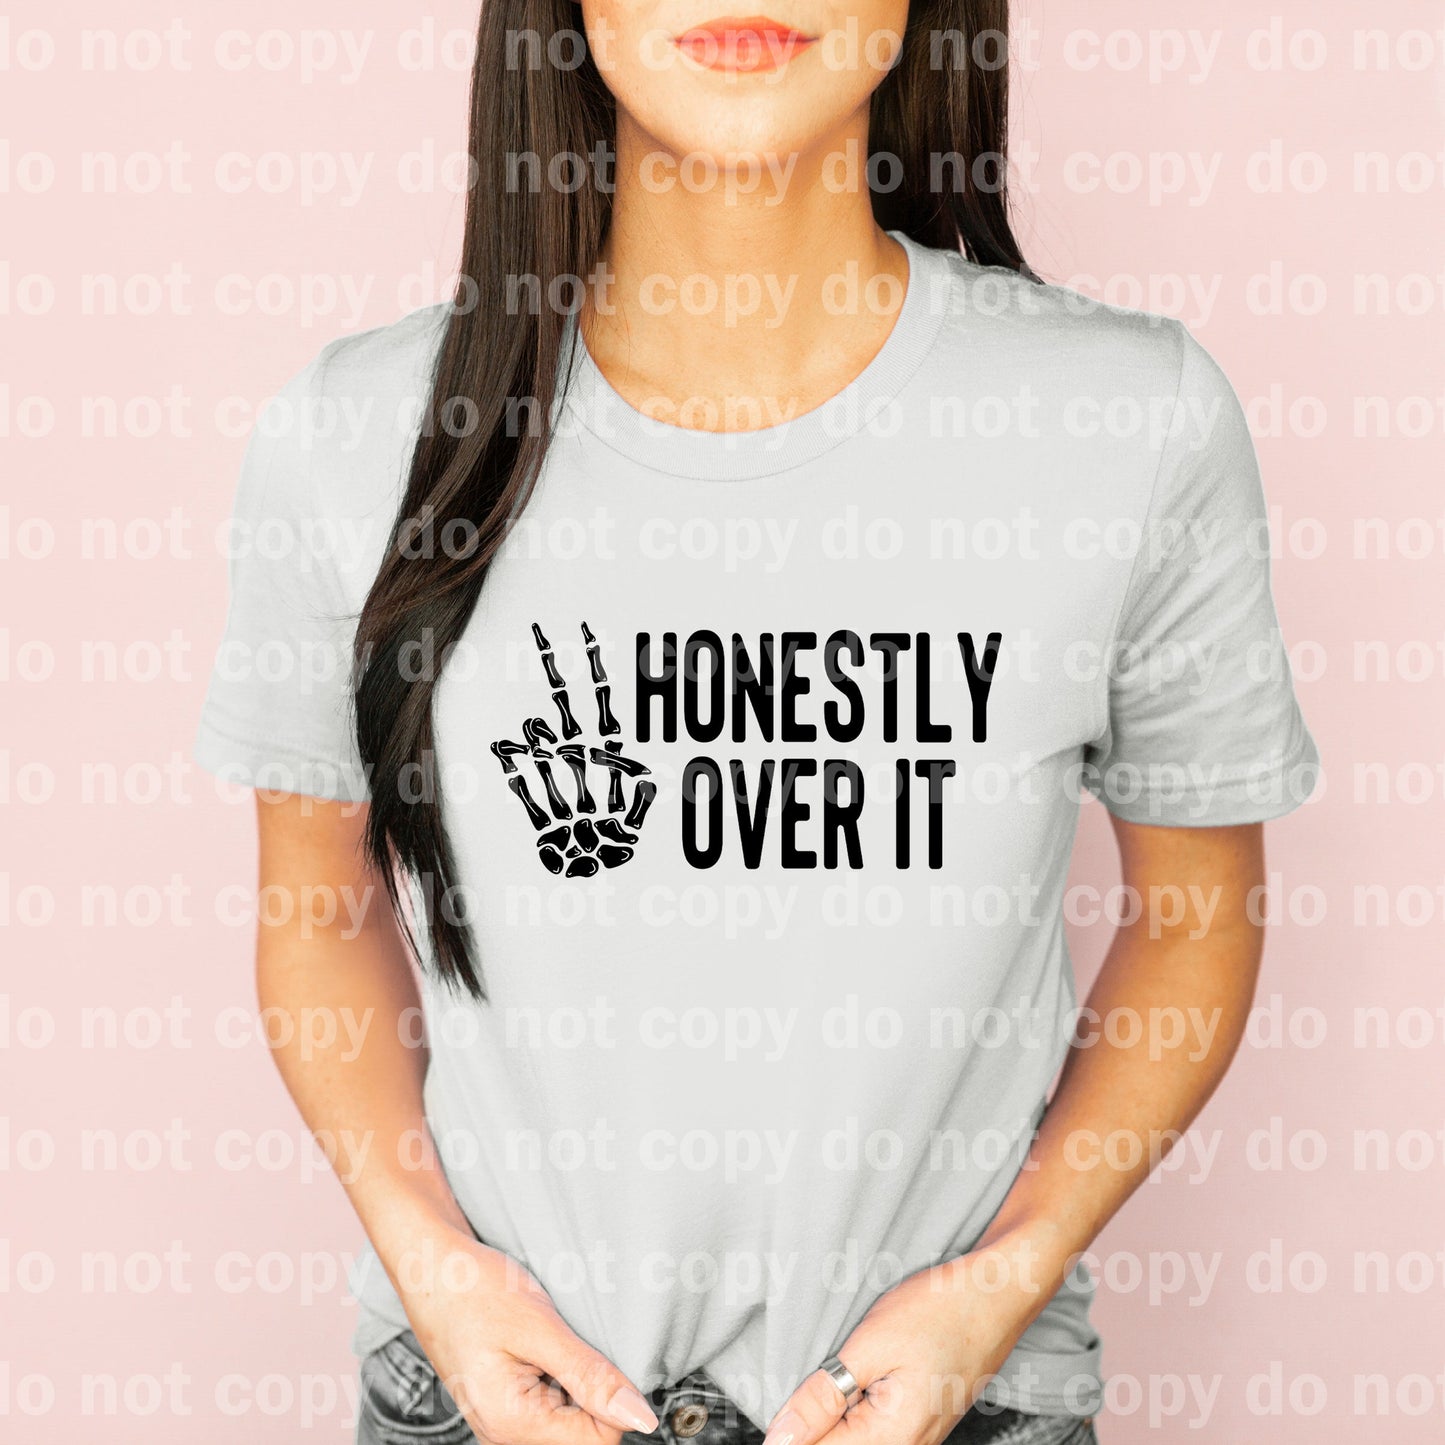 Honestly Over It Distressed/Non Distressed Dream Print or Sublimation Print